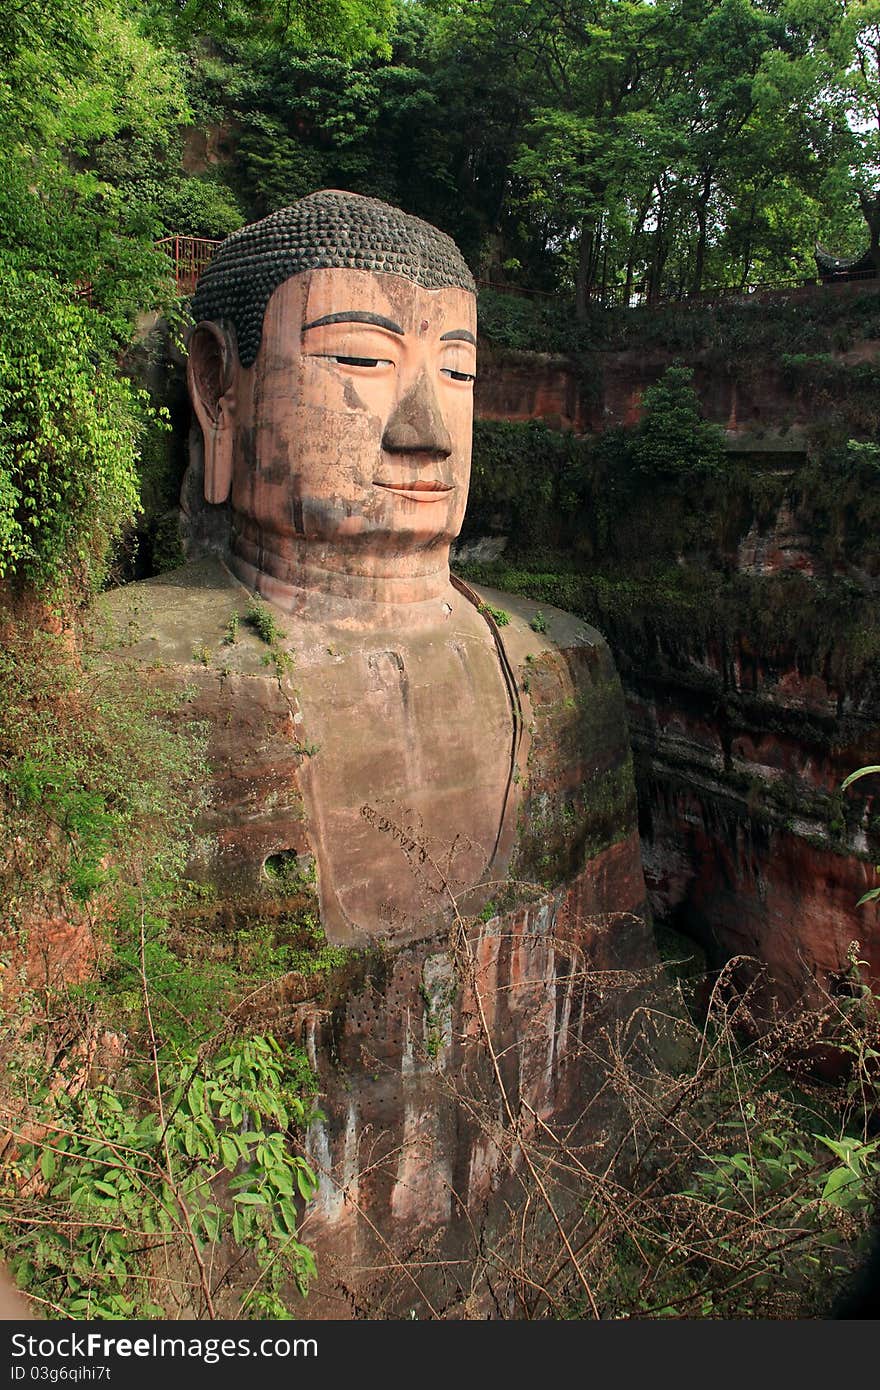 Leshan Giant Buddha is located in Leshan City, Sichuan Province, is the fine art of the Tang Dynasty statues Mo Yan is one of the world's largest stone Buddha seated. Known as: Buddha is a mountain, the mountain is a Buddha.Buddha 71 meters-high, head height 14.7 meters, the first 10 meters wide, hair 1021, 7 meters long ears, nose length 5.6 meters, 5.6 meters long eyebrows, mouth and eye length of 3.3 meters, 3 meters high neck, shoulder 24 meters, 8.3 meters long fingers, 28 meters from knee to foot, feet wide and 8.5 meters, the foot can be seated more than a hundred.